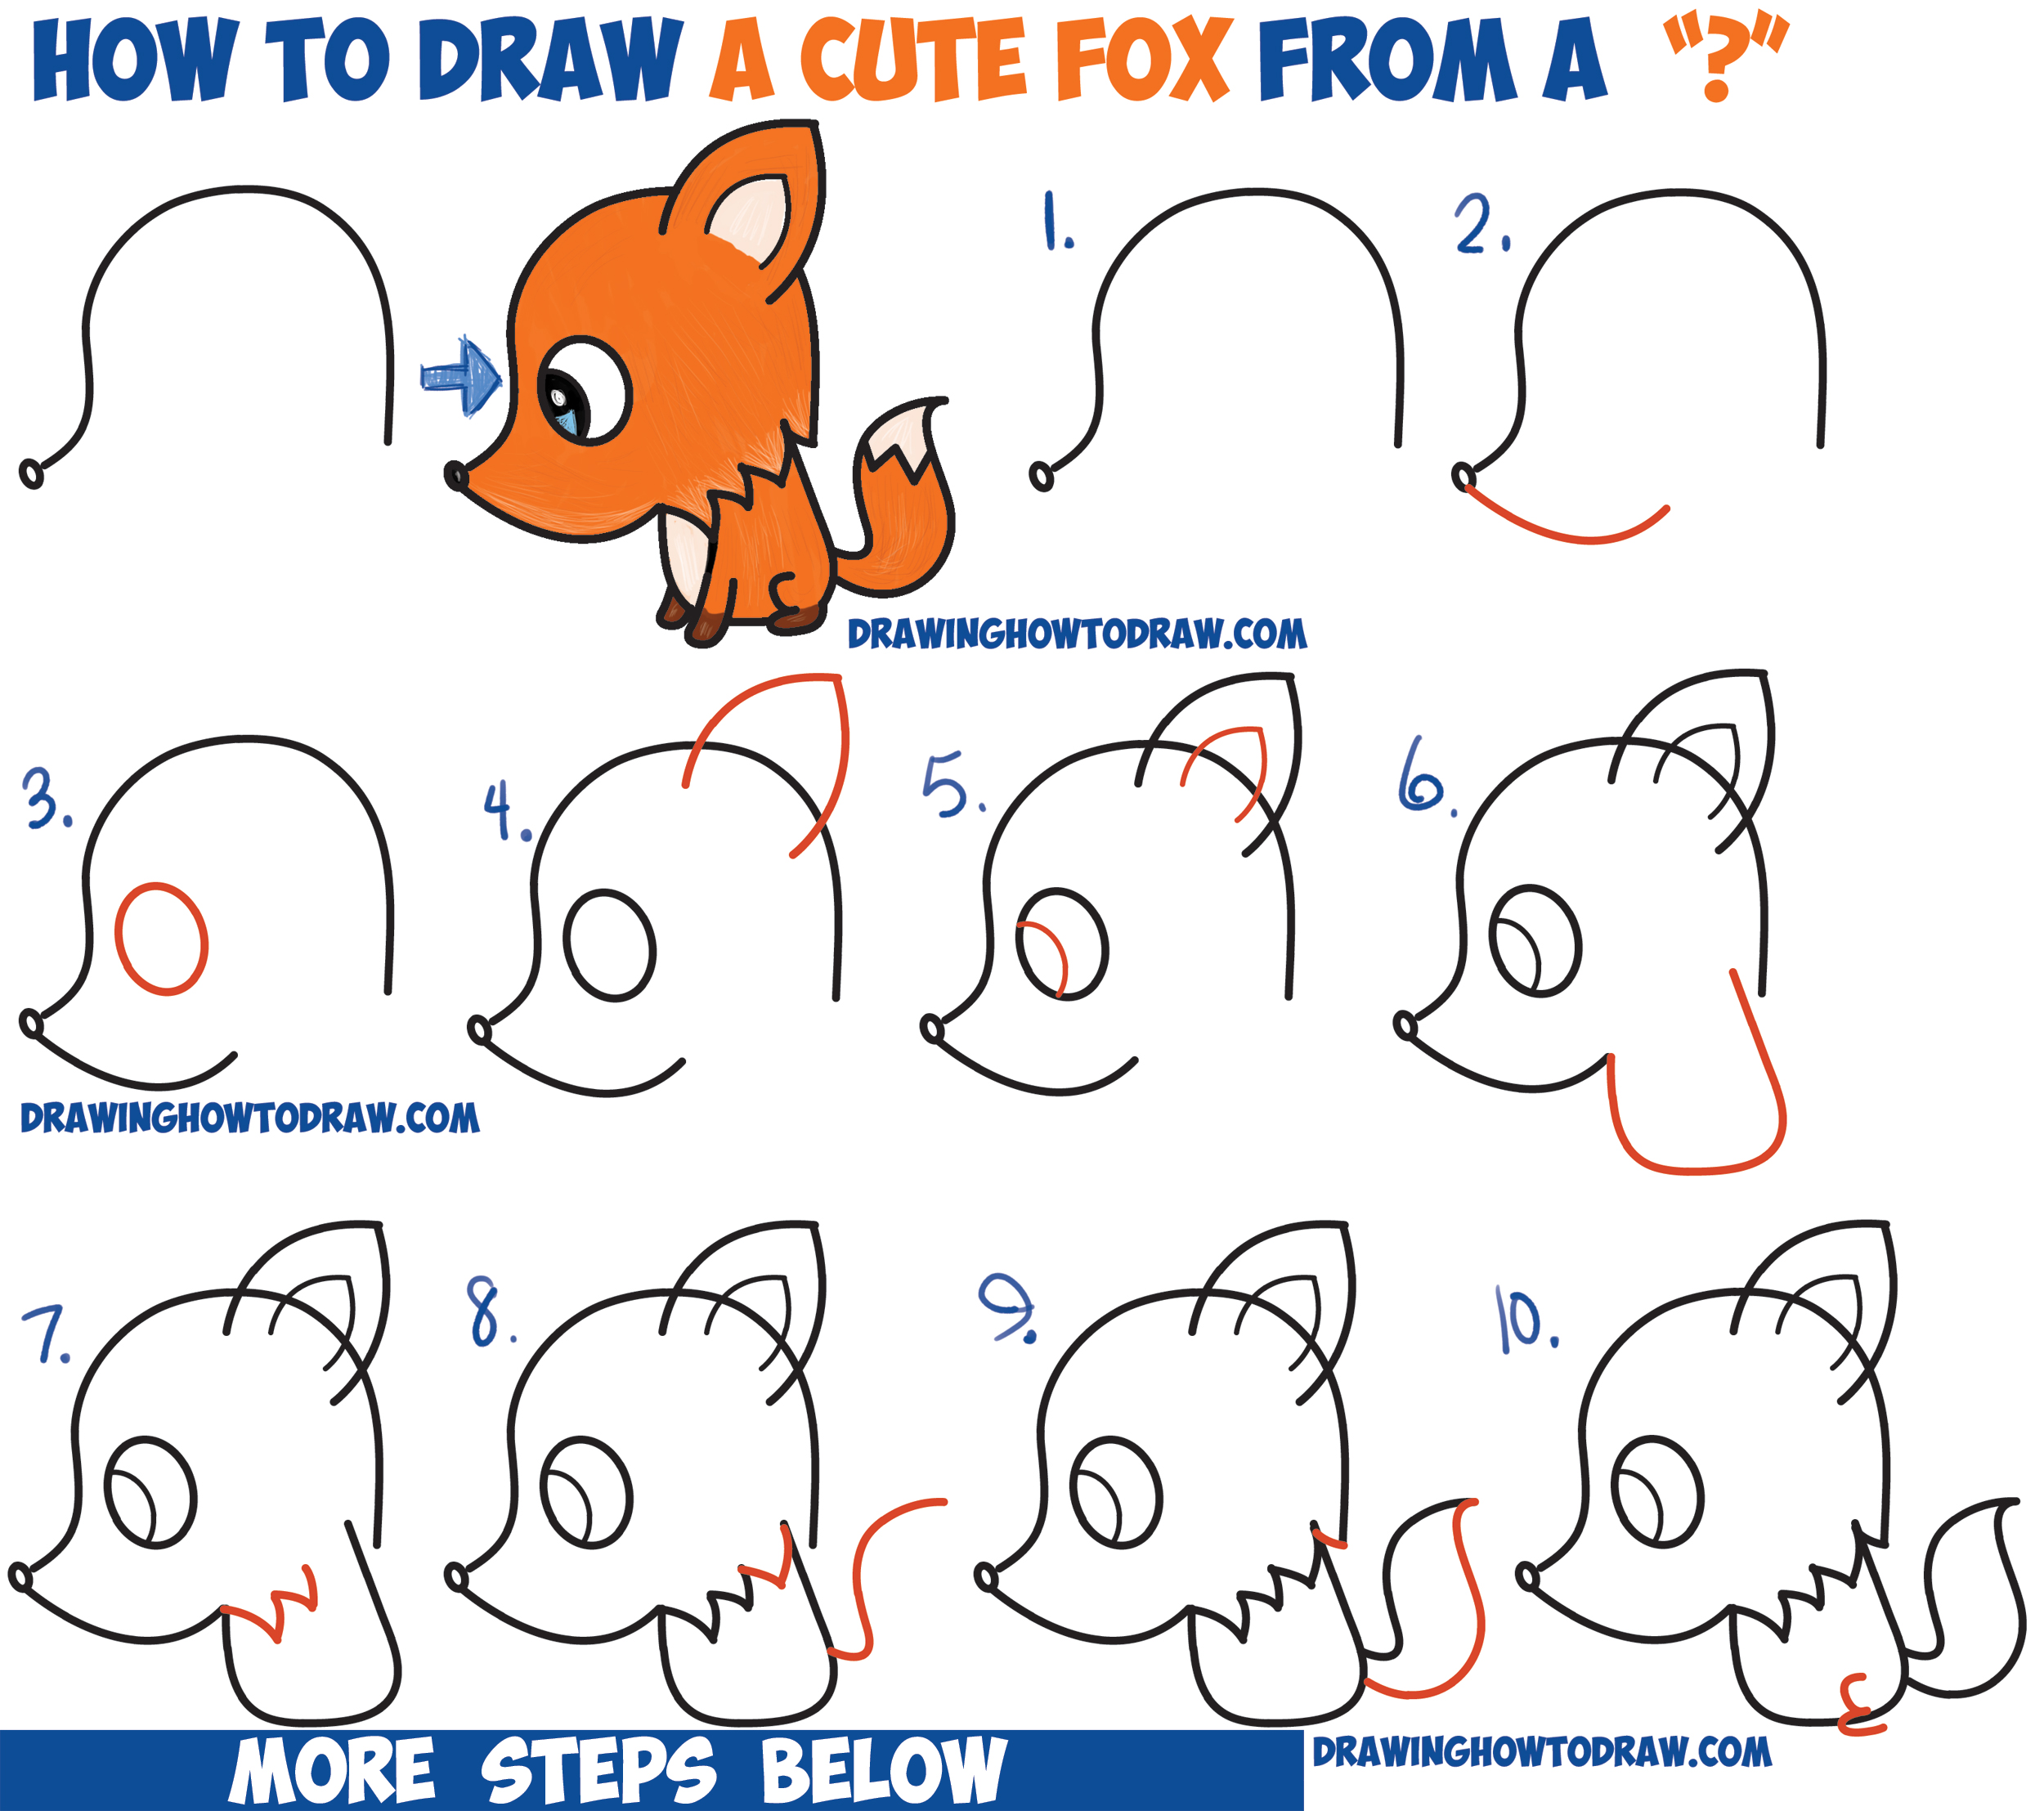 How to Draw a Cute Cartoon Fox from a Question Mark (Kawaii / Chibi) Easy Step by Step Drawing ...